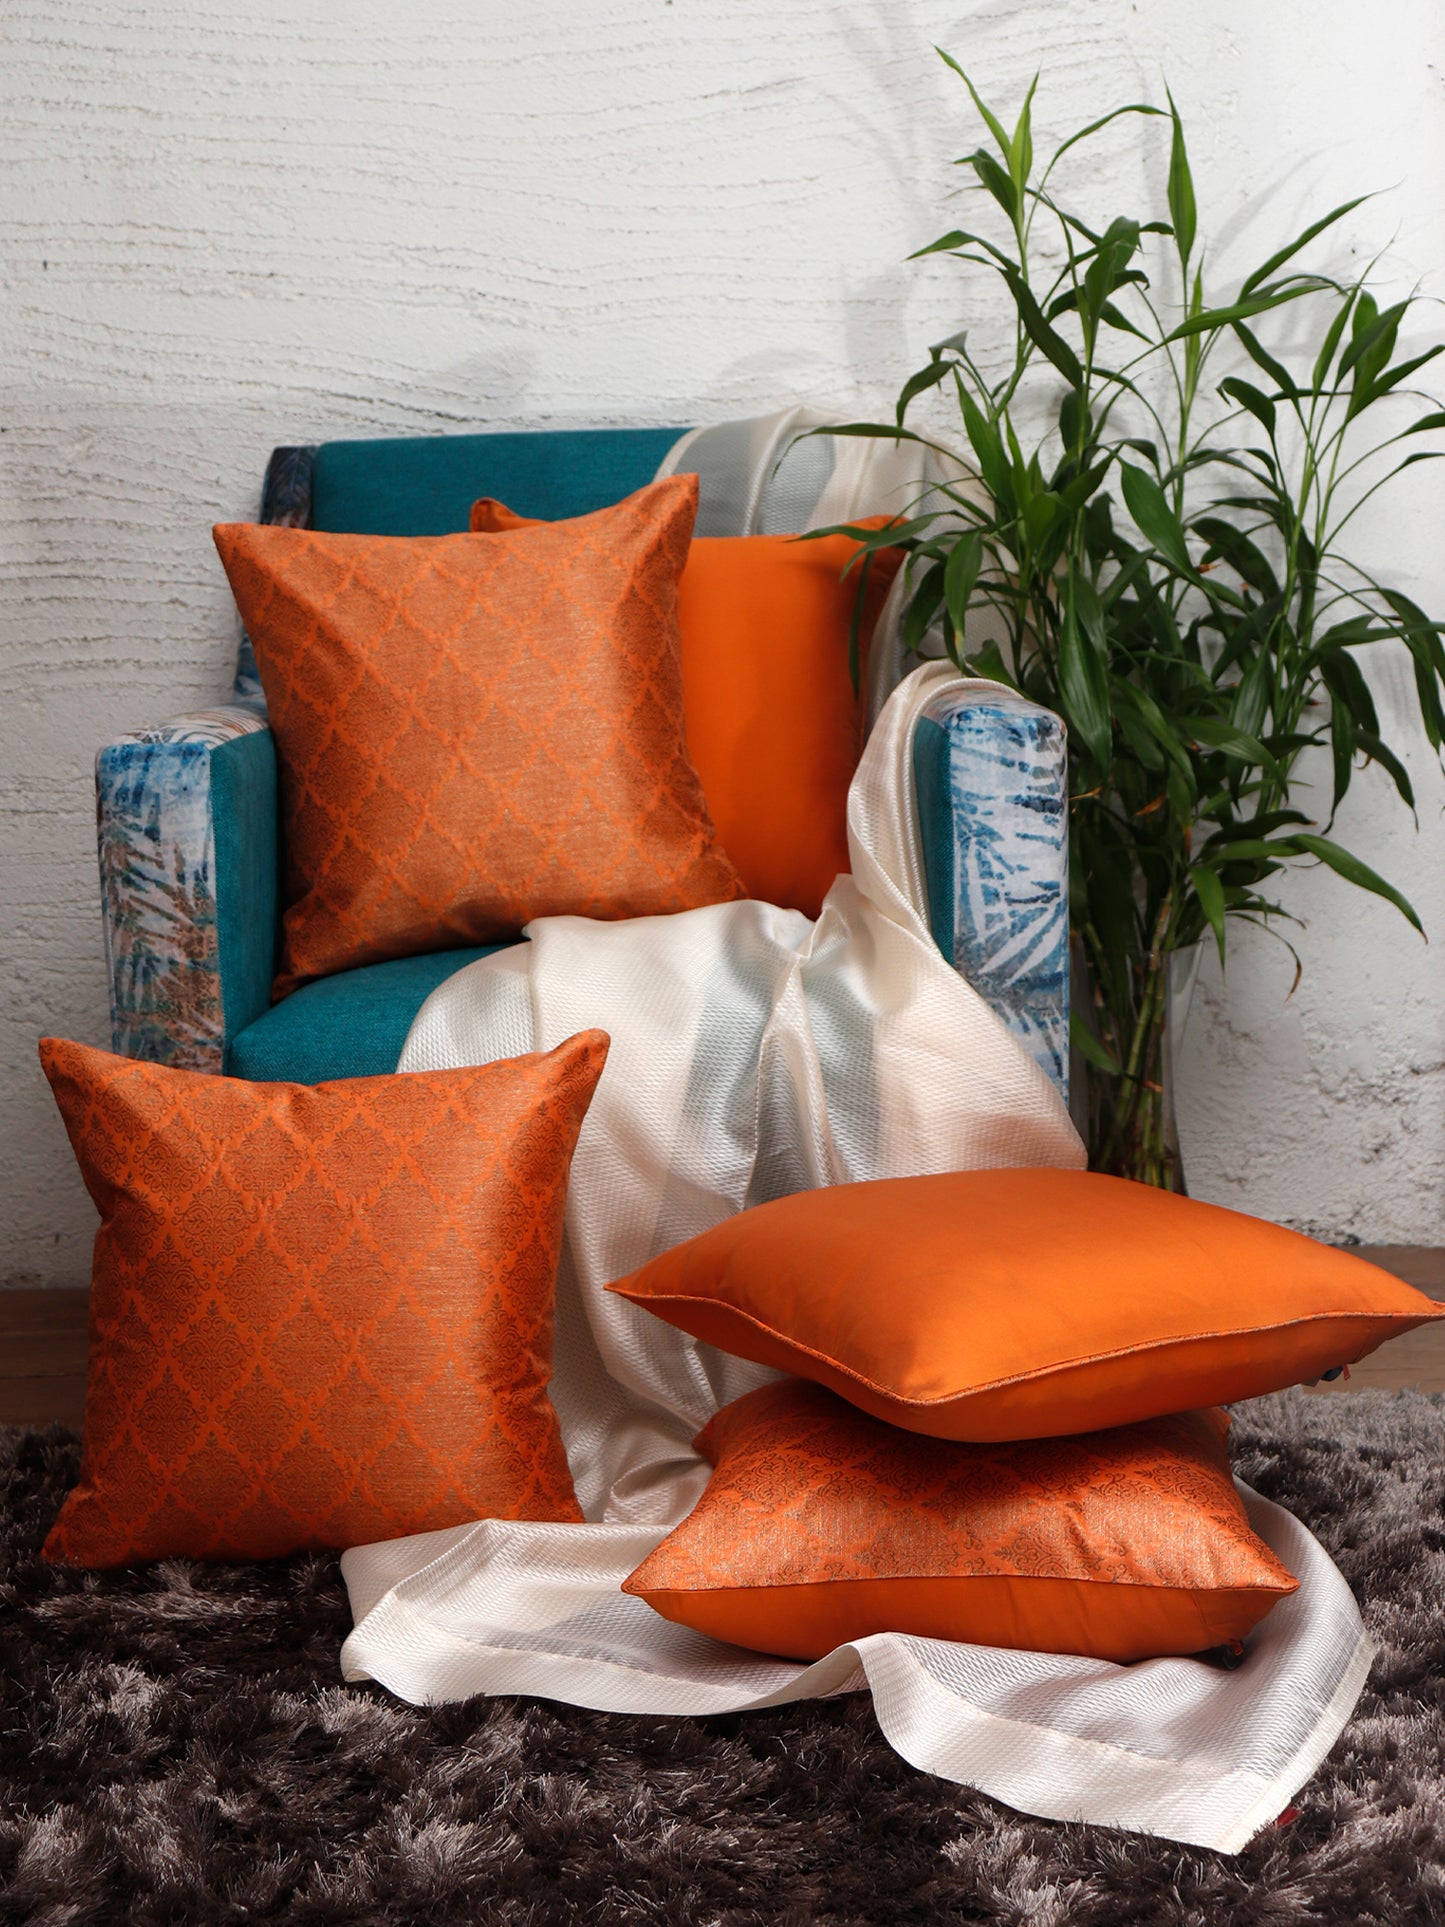 Co-ordinated Cushion Cover Set of 5 Cotton Blend Self Textured Brocade Orange - 16" X 16"